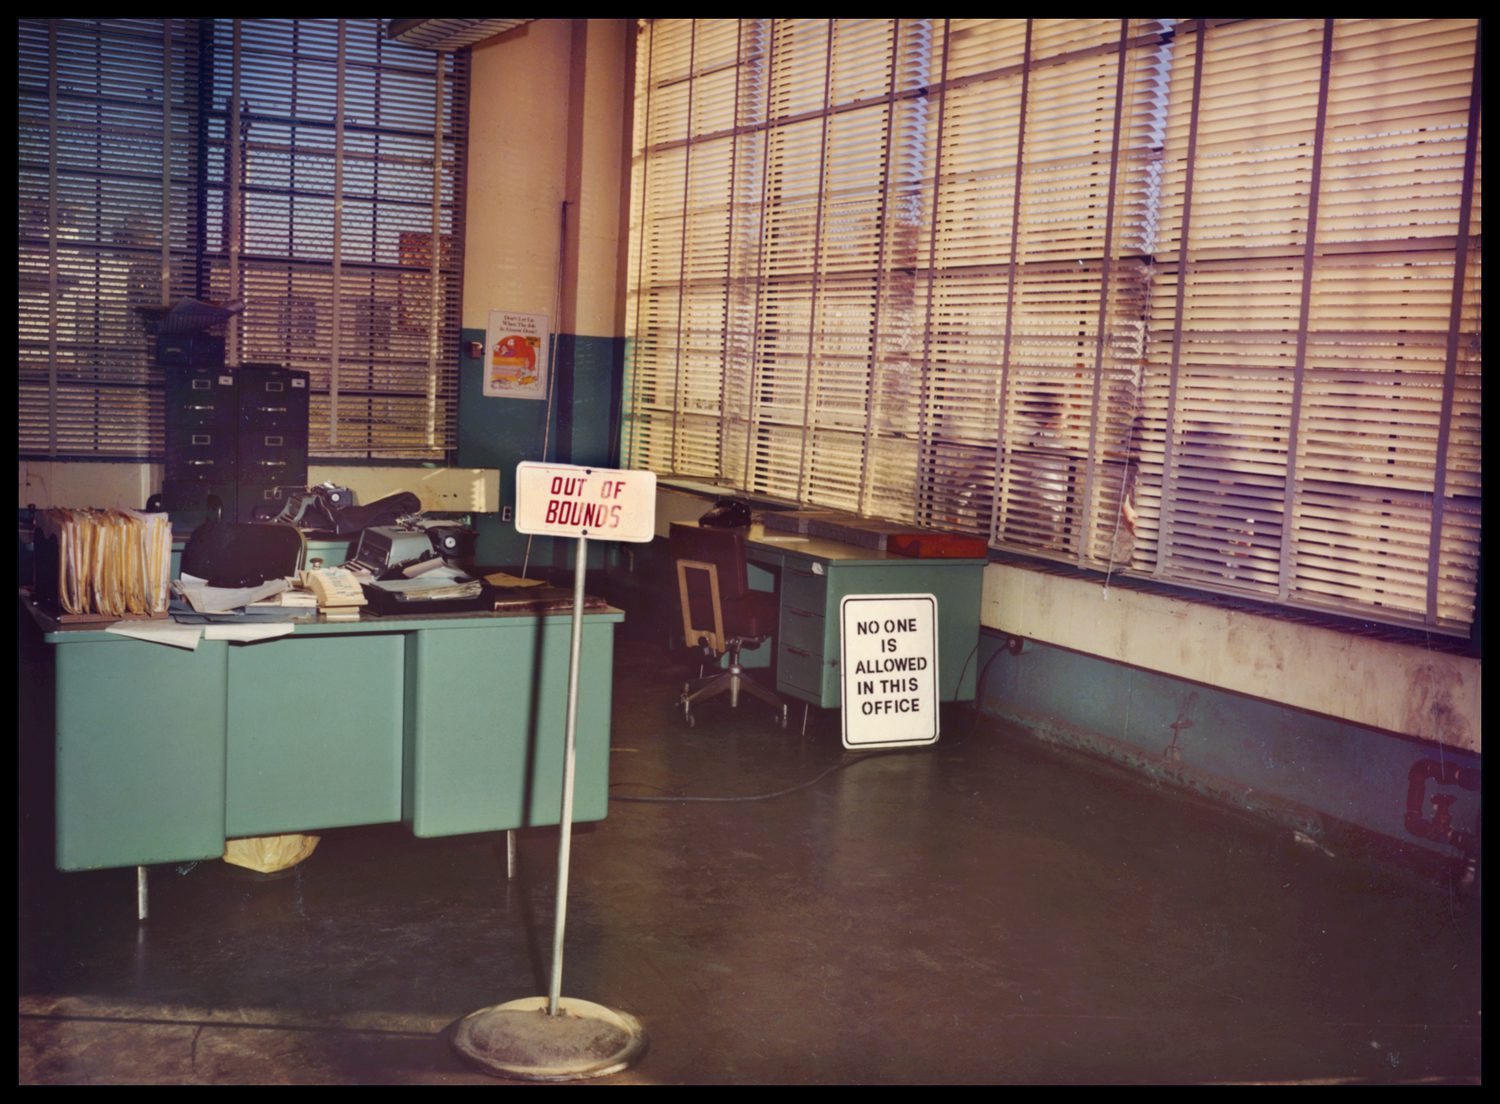 2 desks by large windows with blinds, signs read "Out of bounds" and "no one is allowed in this office."